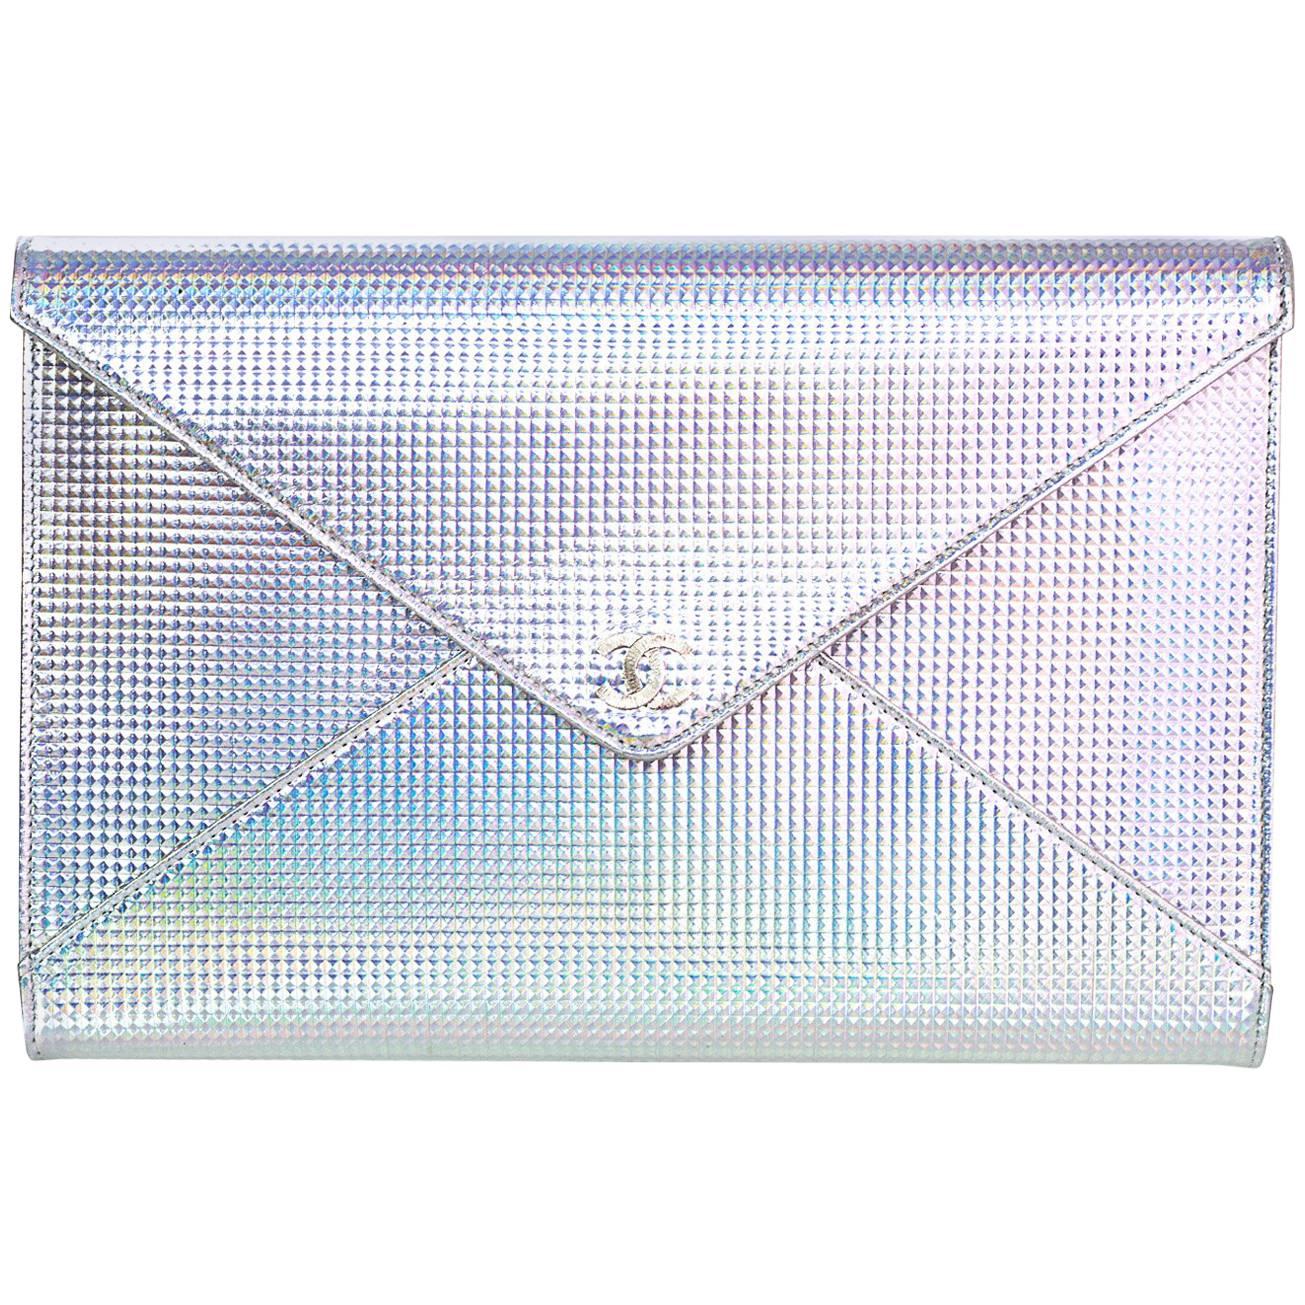 Chanel Silver Holographic Envelope Clutch Bag with Box